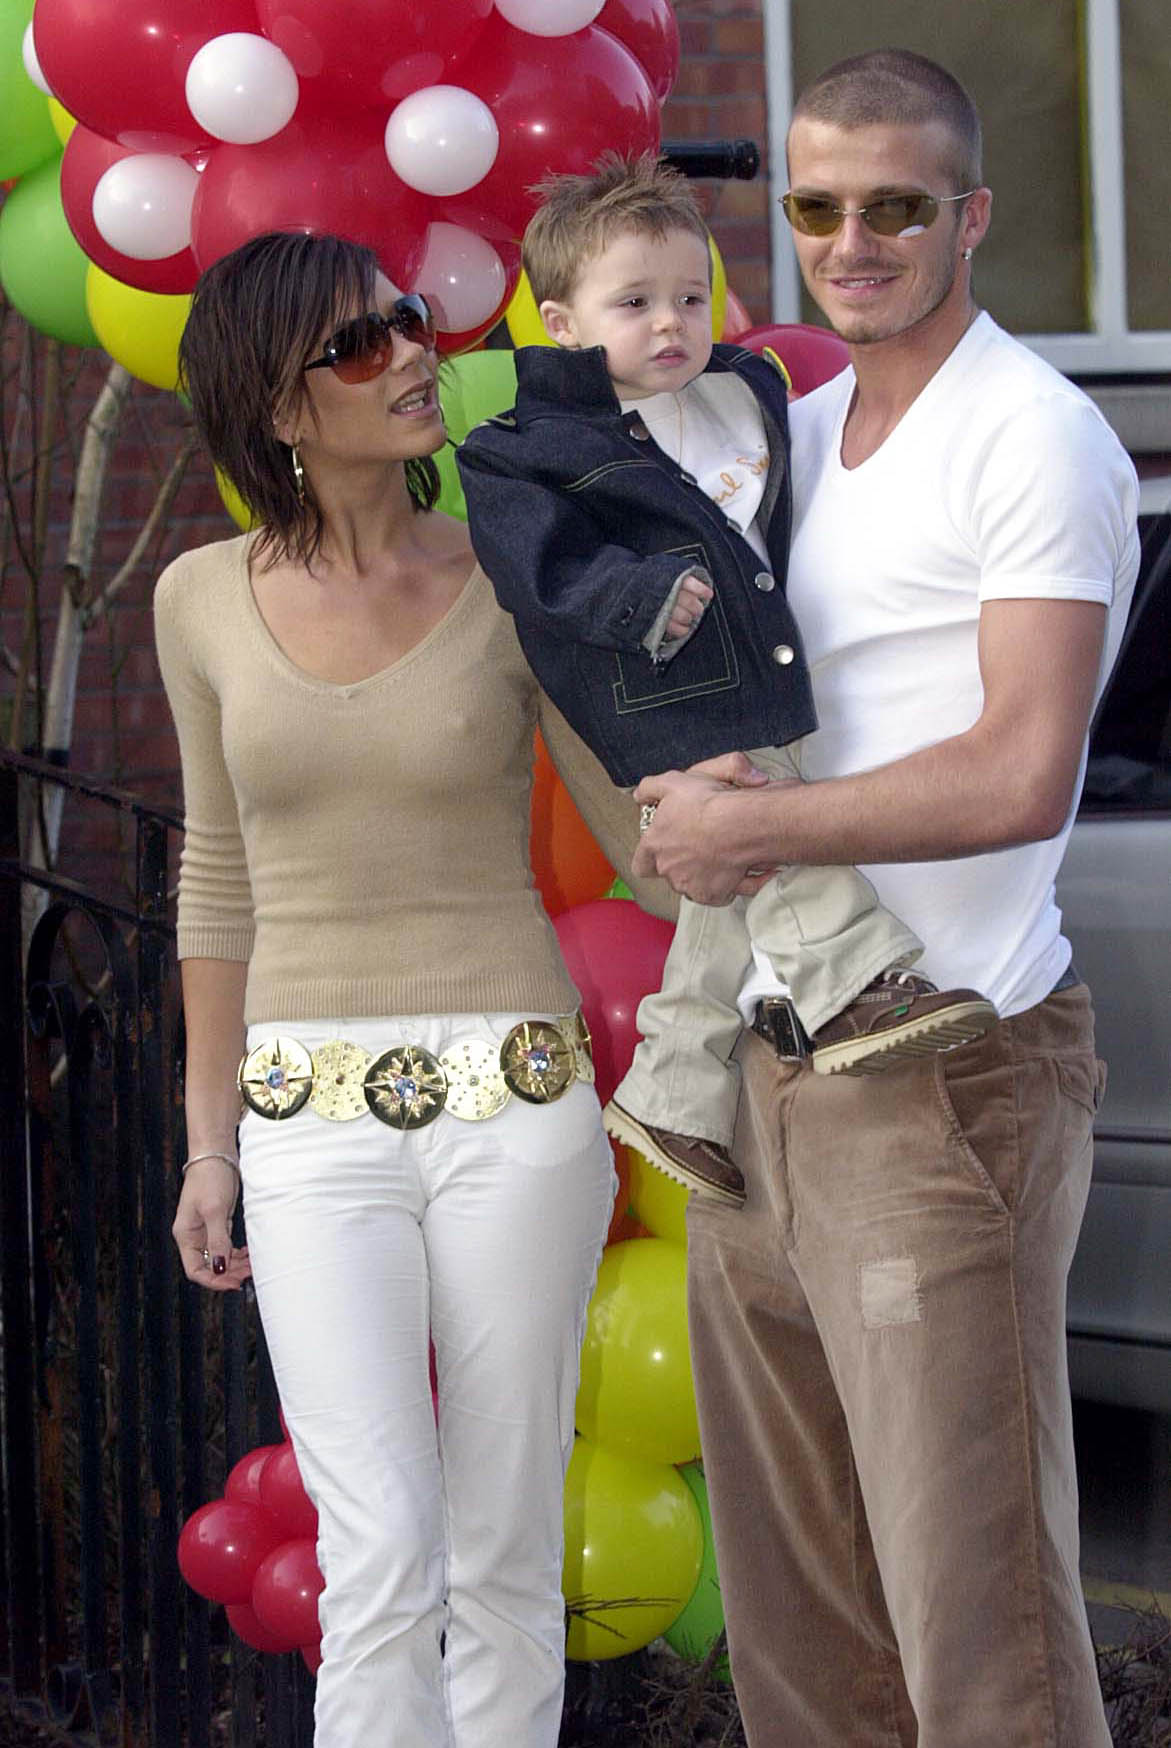 Victoria, Brooklyn, and David Beckham in Alderley Edge, Cheshire, on March 4, 2001. | Source: Getty Images